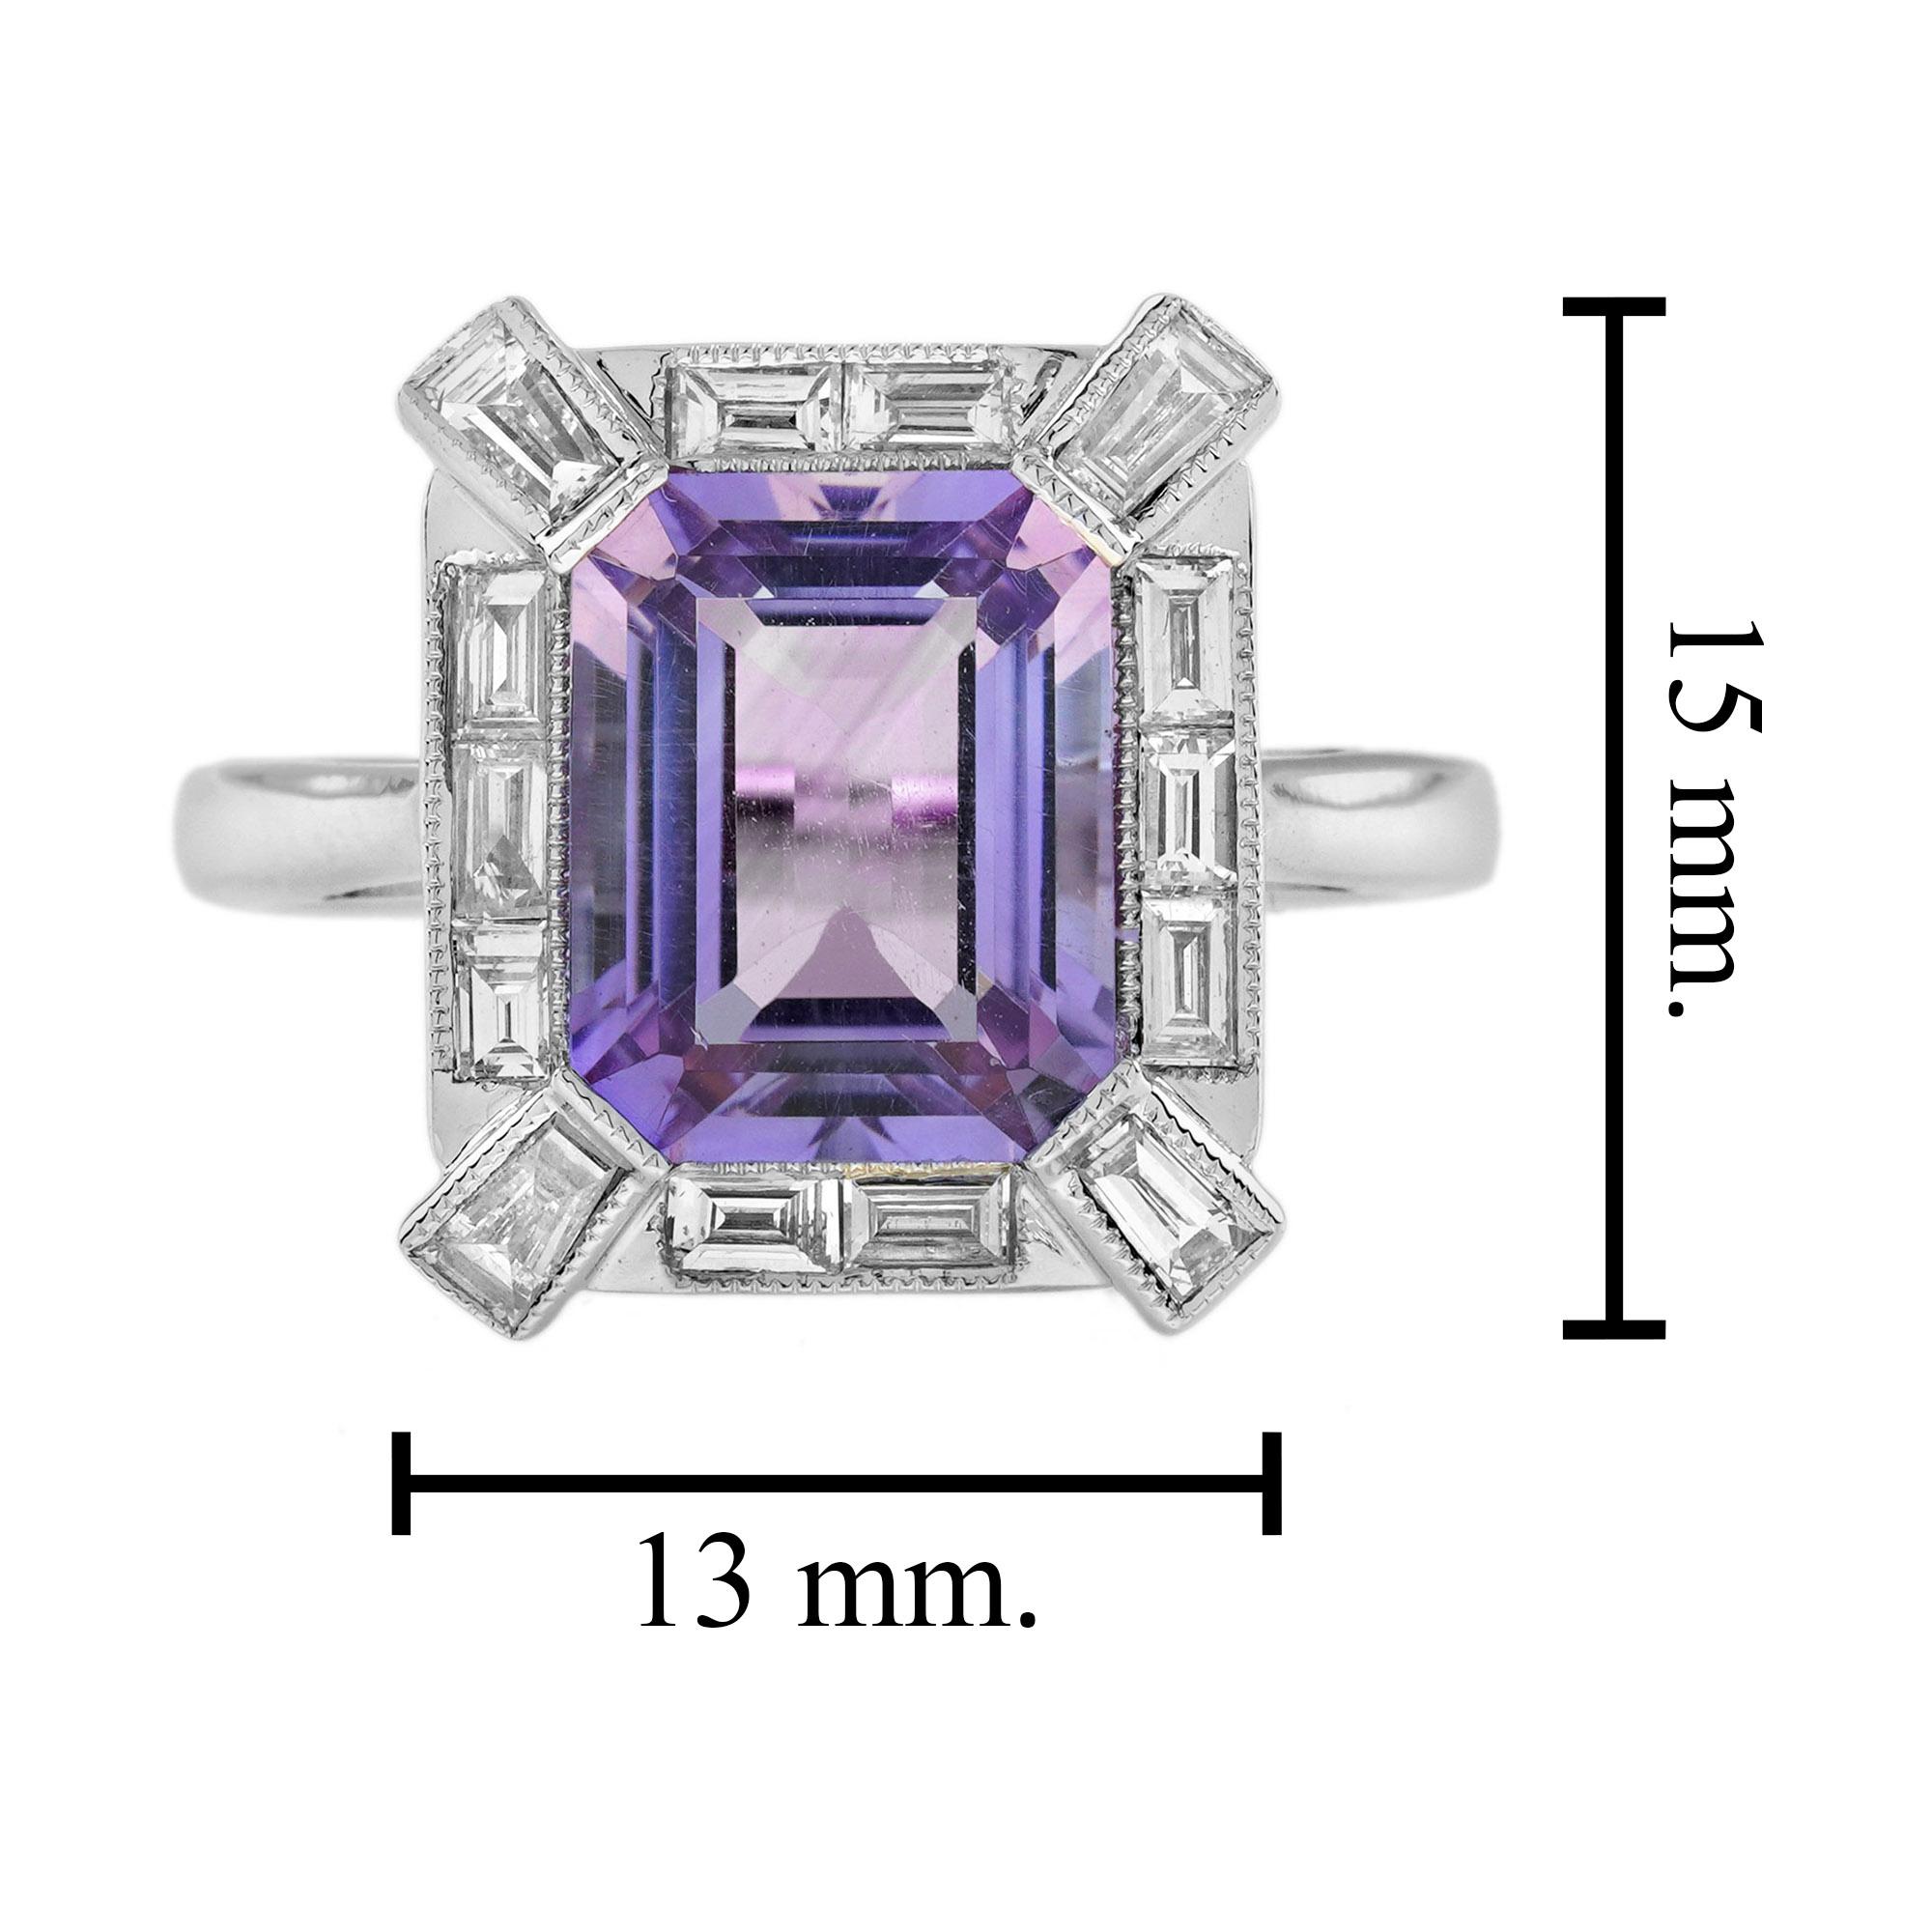 Emerald Cut Pink Amethyst and Diamond Halo Art Deco Style Ring in 14K White Gold For Sale 3